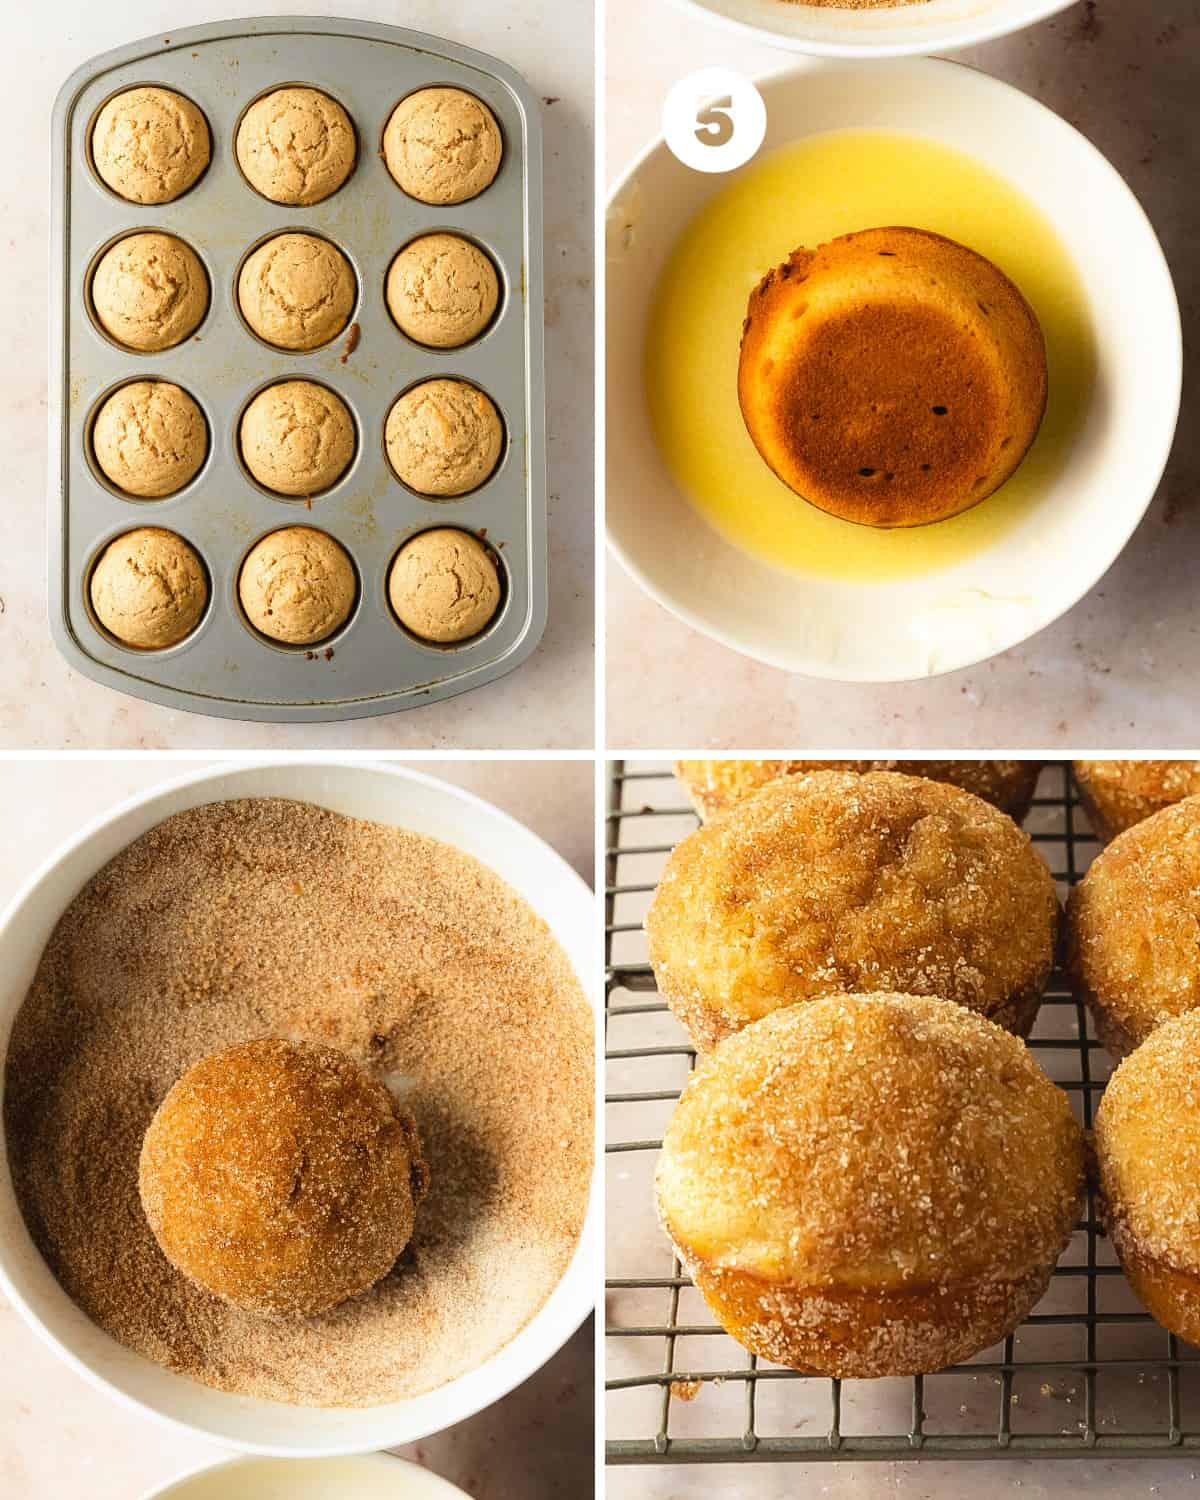 Dip the tops of the cinnamon muffins into the melted butter. Gently shake off any excess butter. Immediately roll the entire muffin in the cinnamon sugar mixture. Set the cinnamon sugar muffin back onto a cooling rack and repeat with the remaining muffins. 